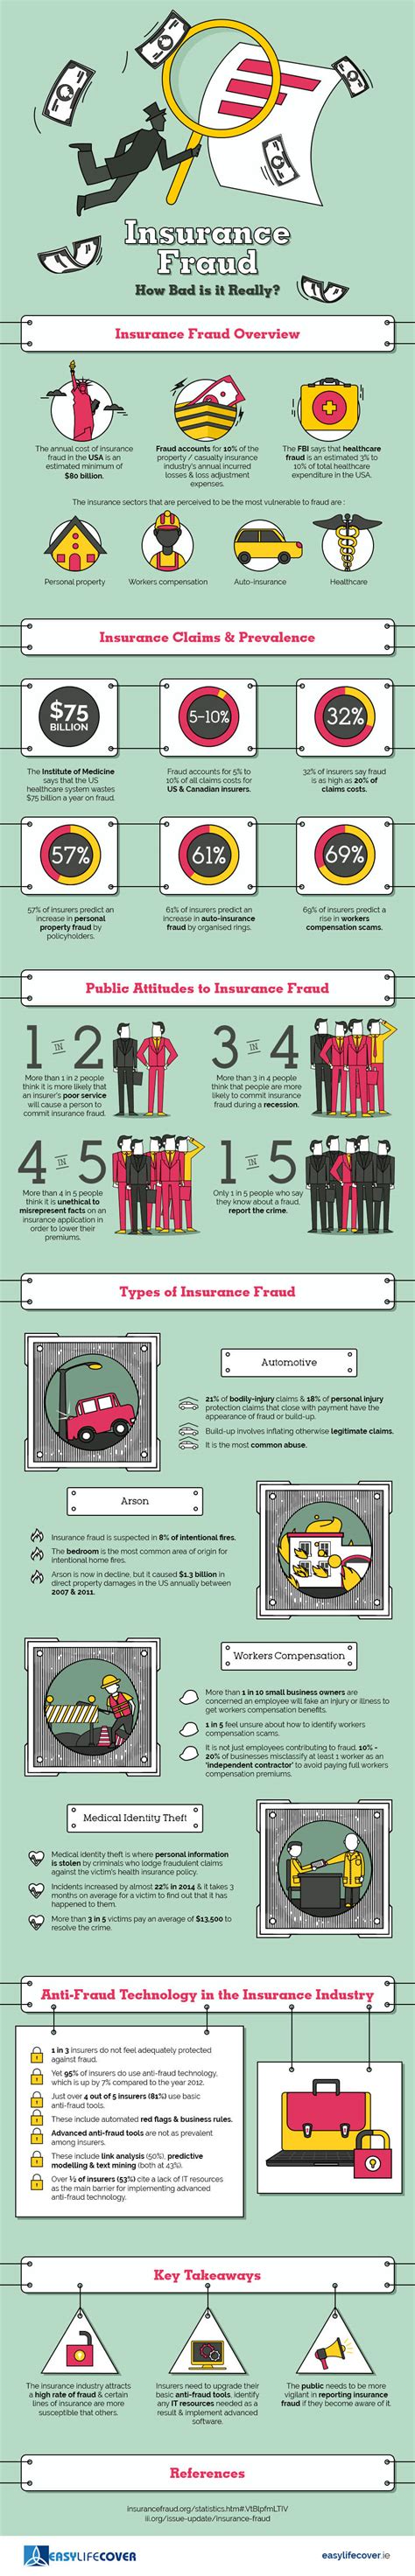 This material is for informational purposes only. Insurance Fraud, How Bad is it Really? INFOGRAPHIC